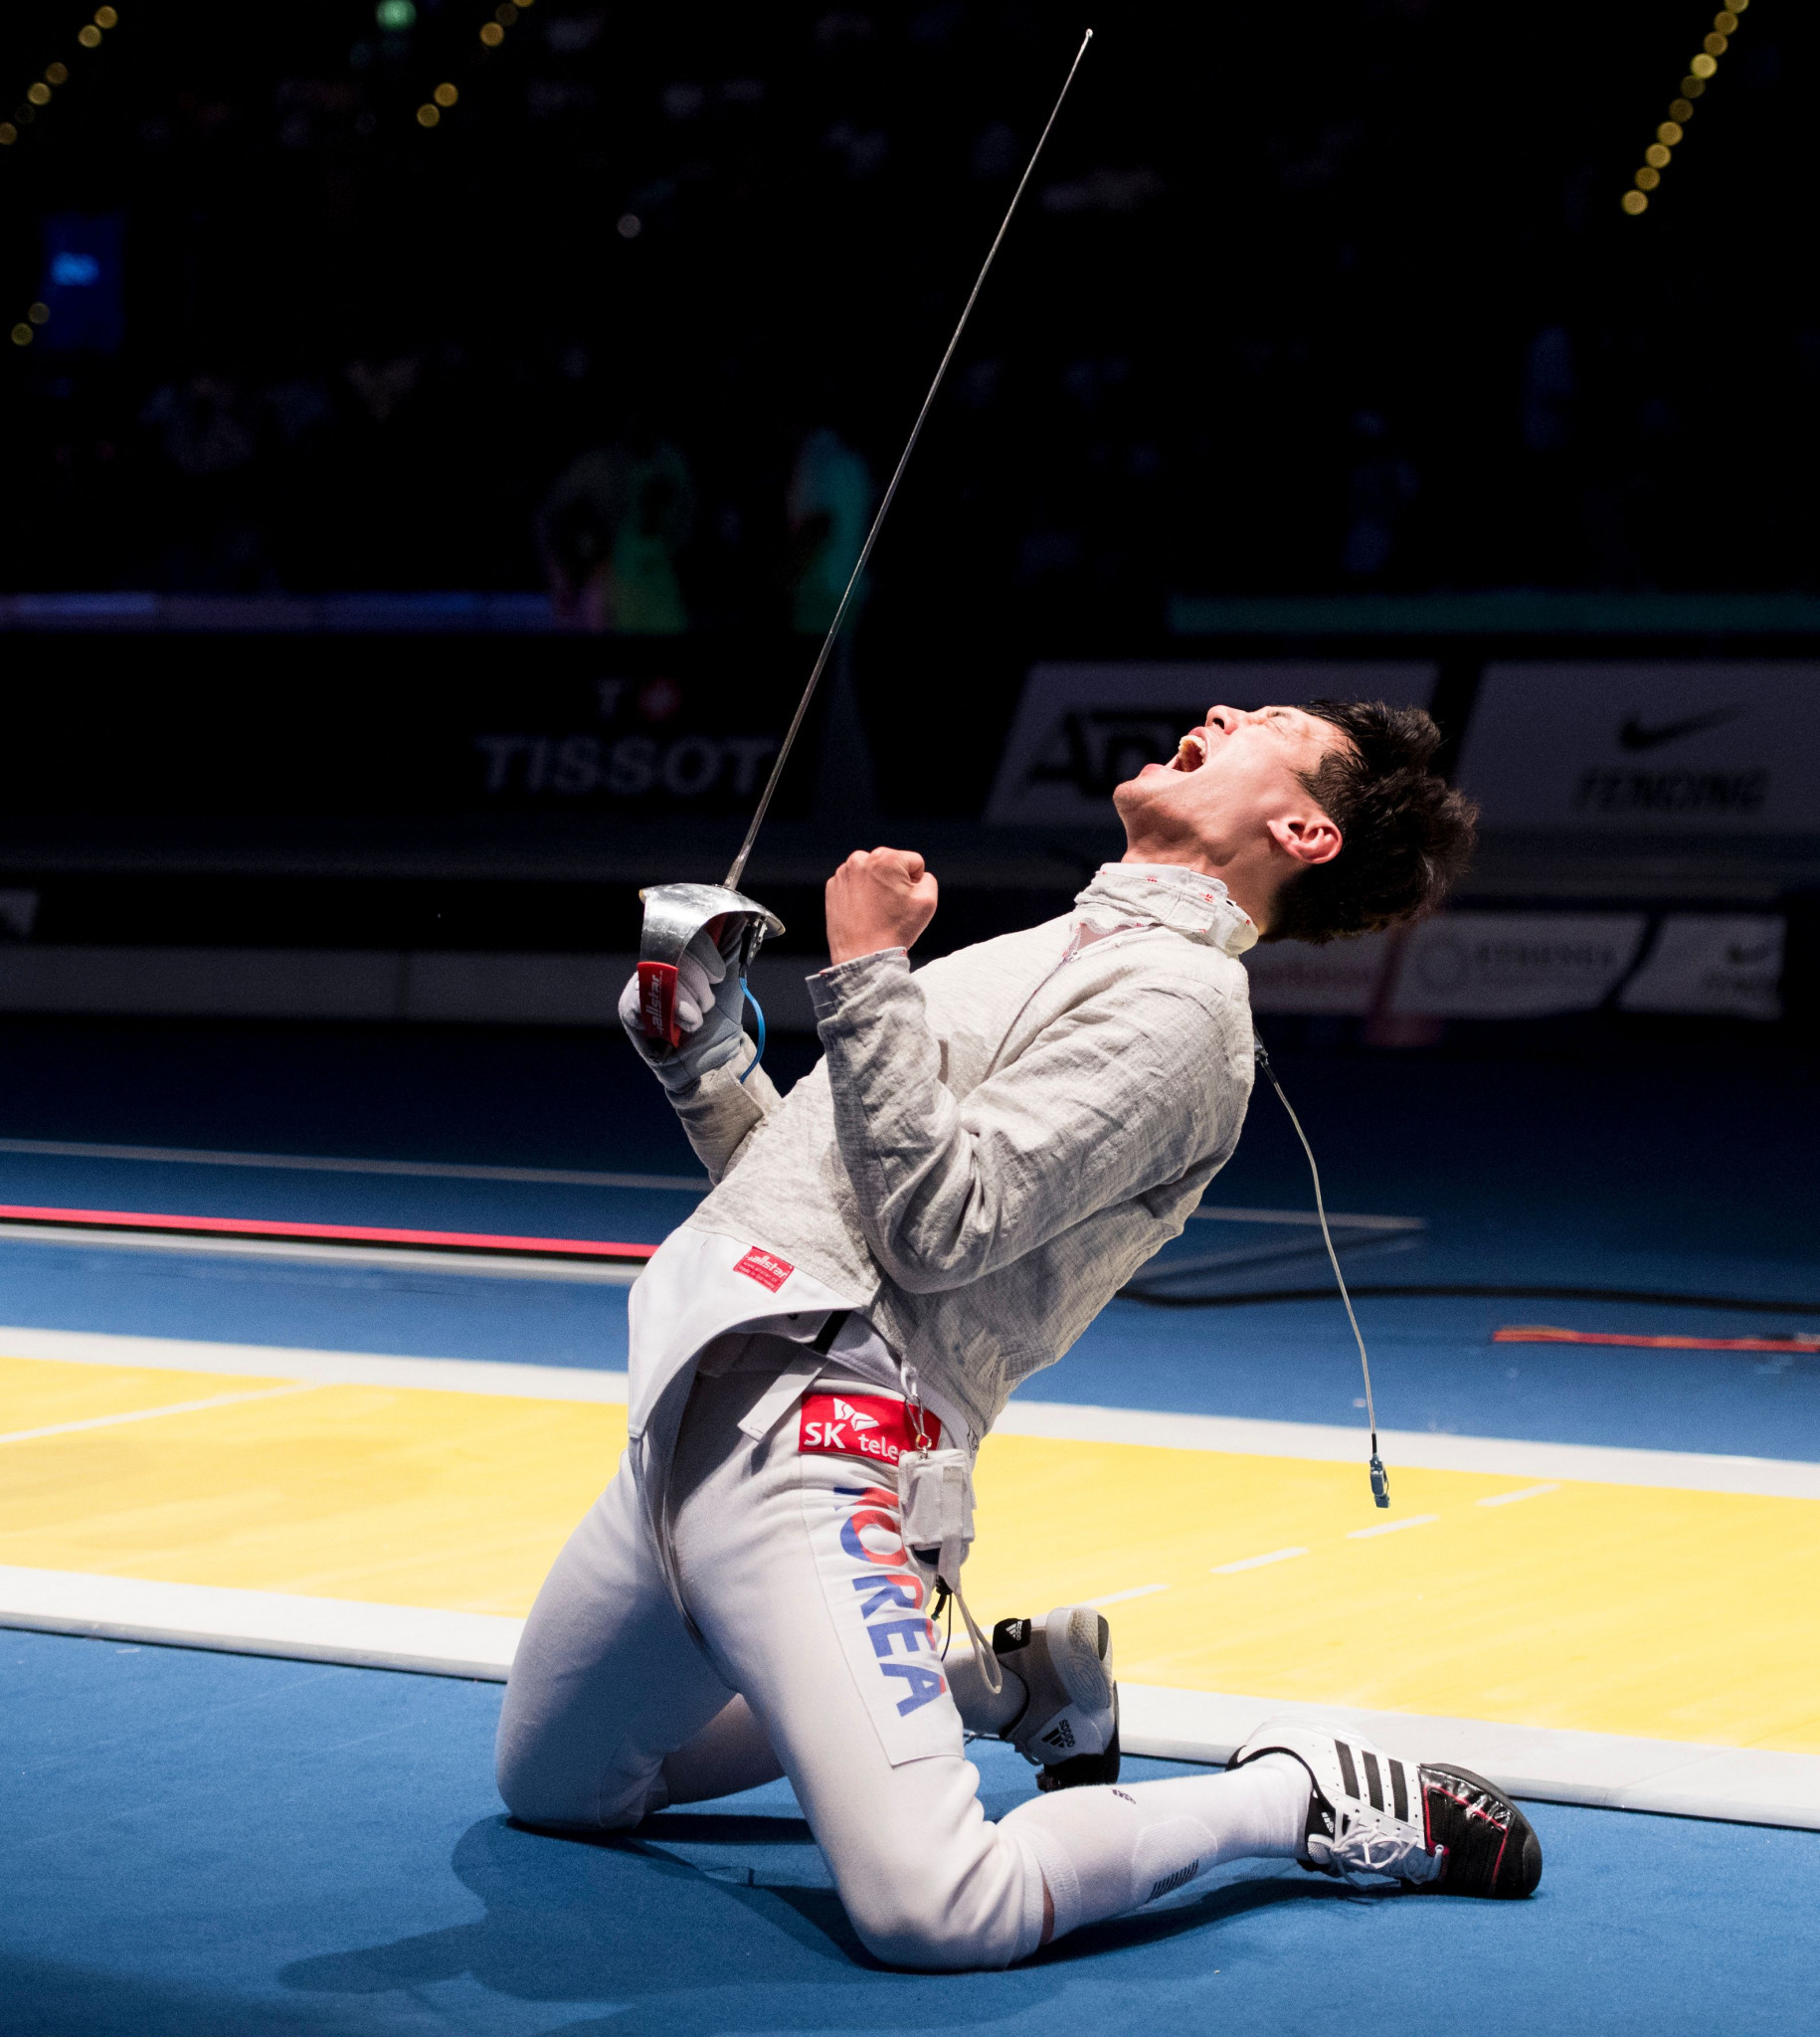 World number one Gu Bon-gil of South Korea will be looking to return to form when he competes at the International Fencing Federation Sabre Grand Prix in Moscow this weekend ©Getty Images